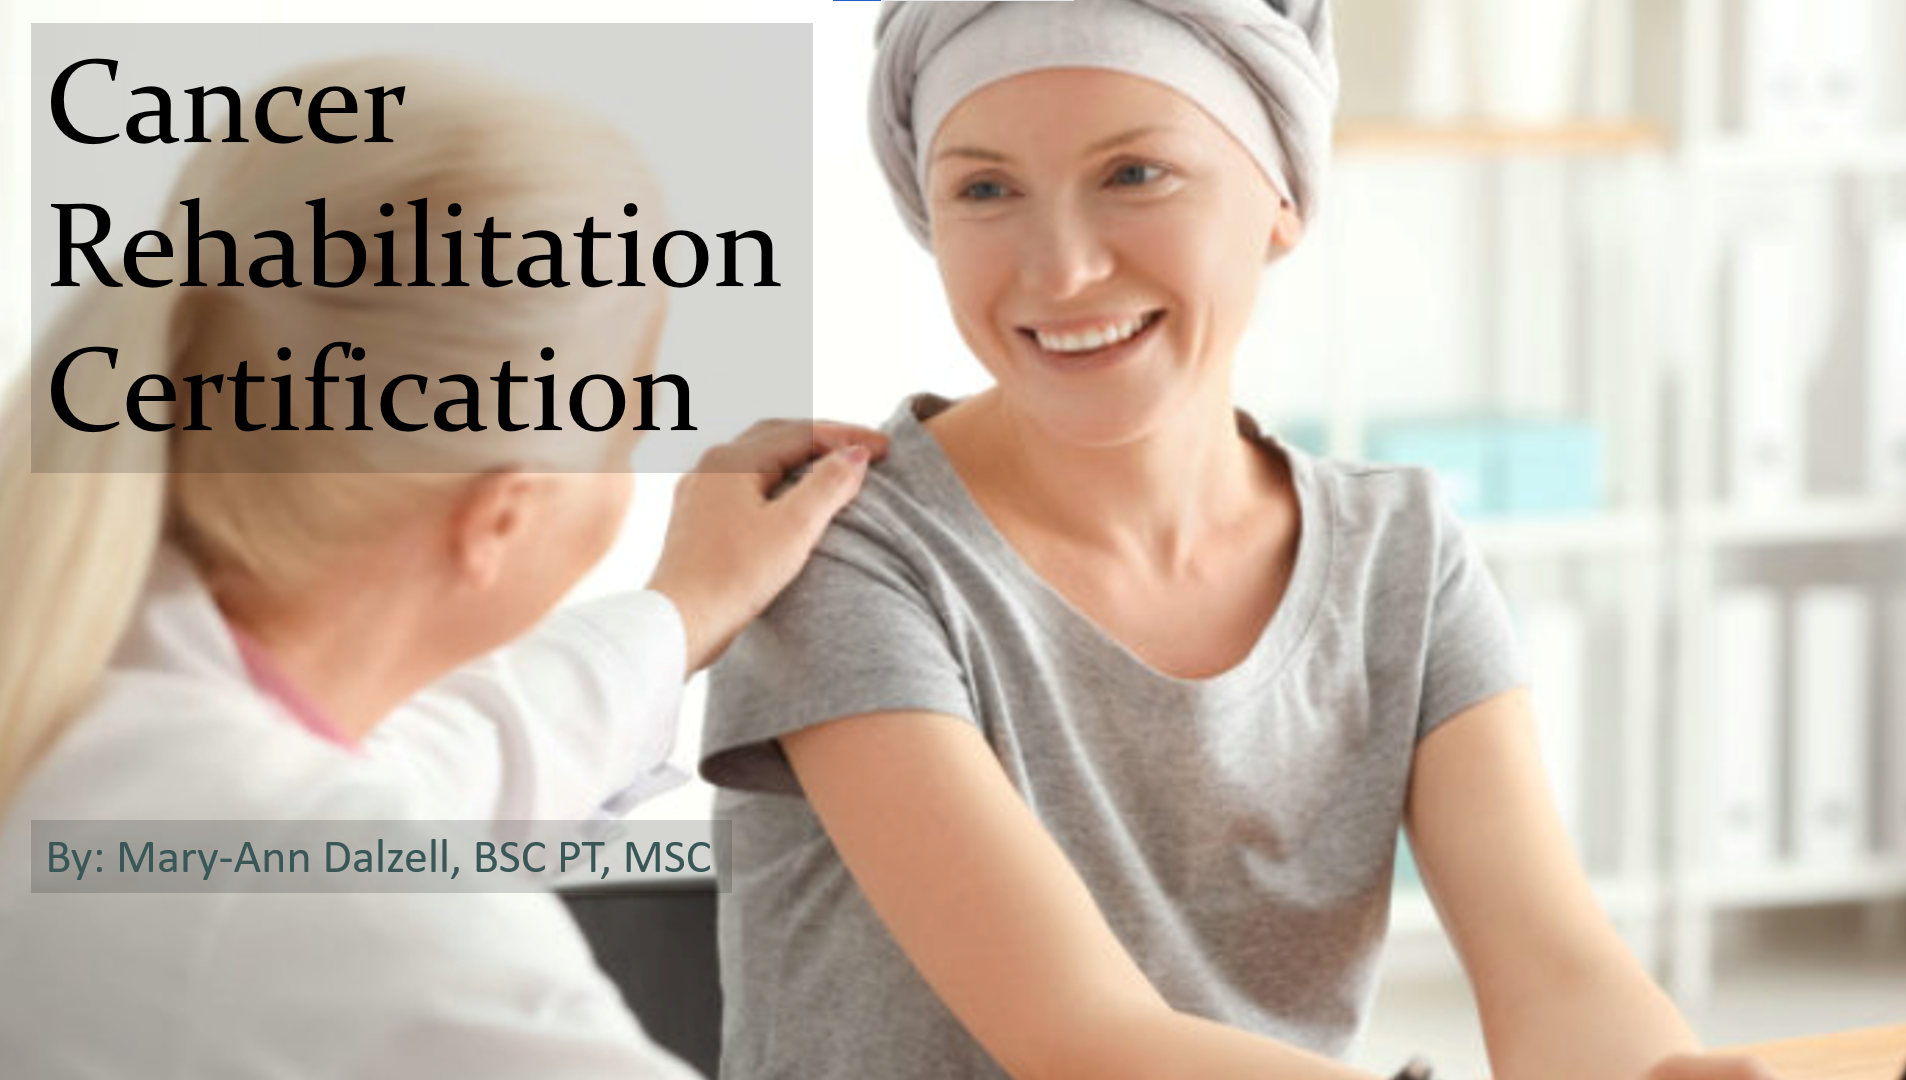 Cancer Rehabilitation Certification Online Course Key Clinical Skills